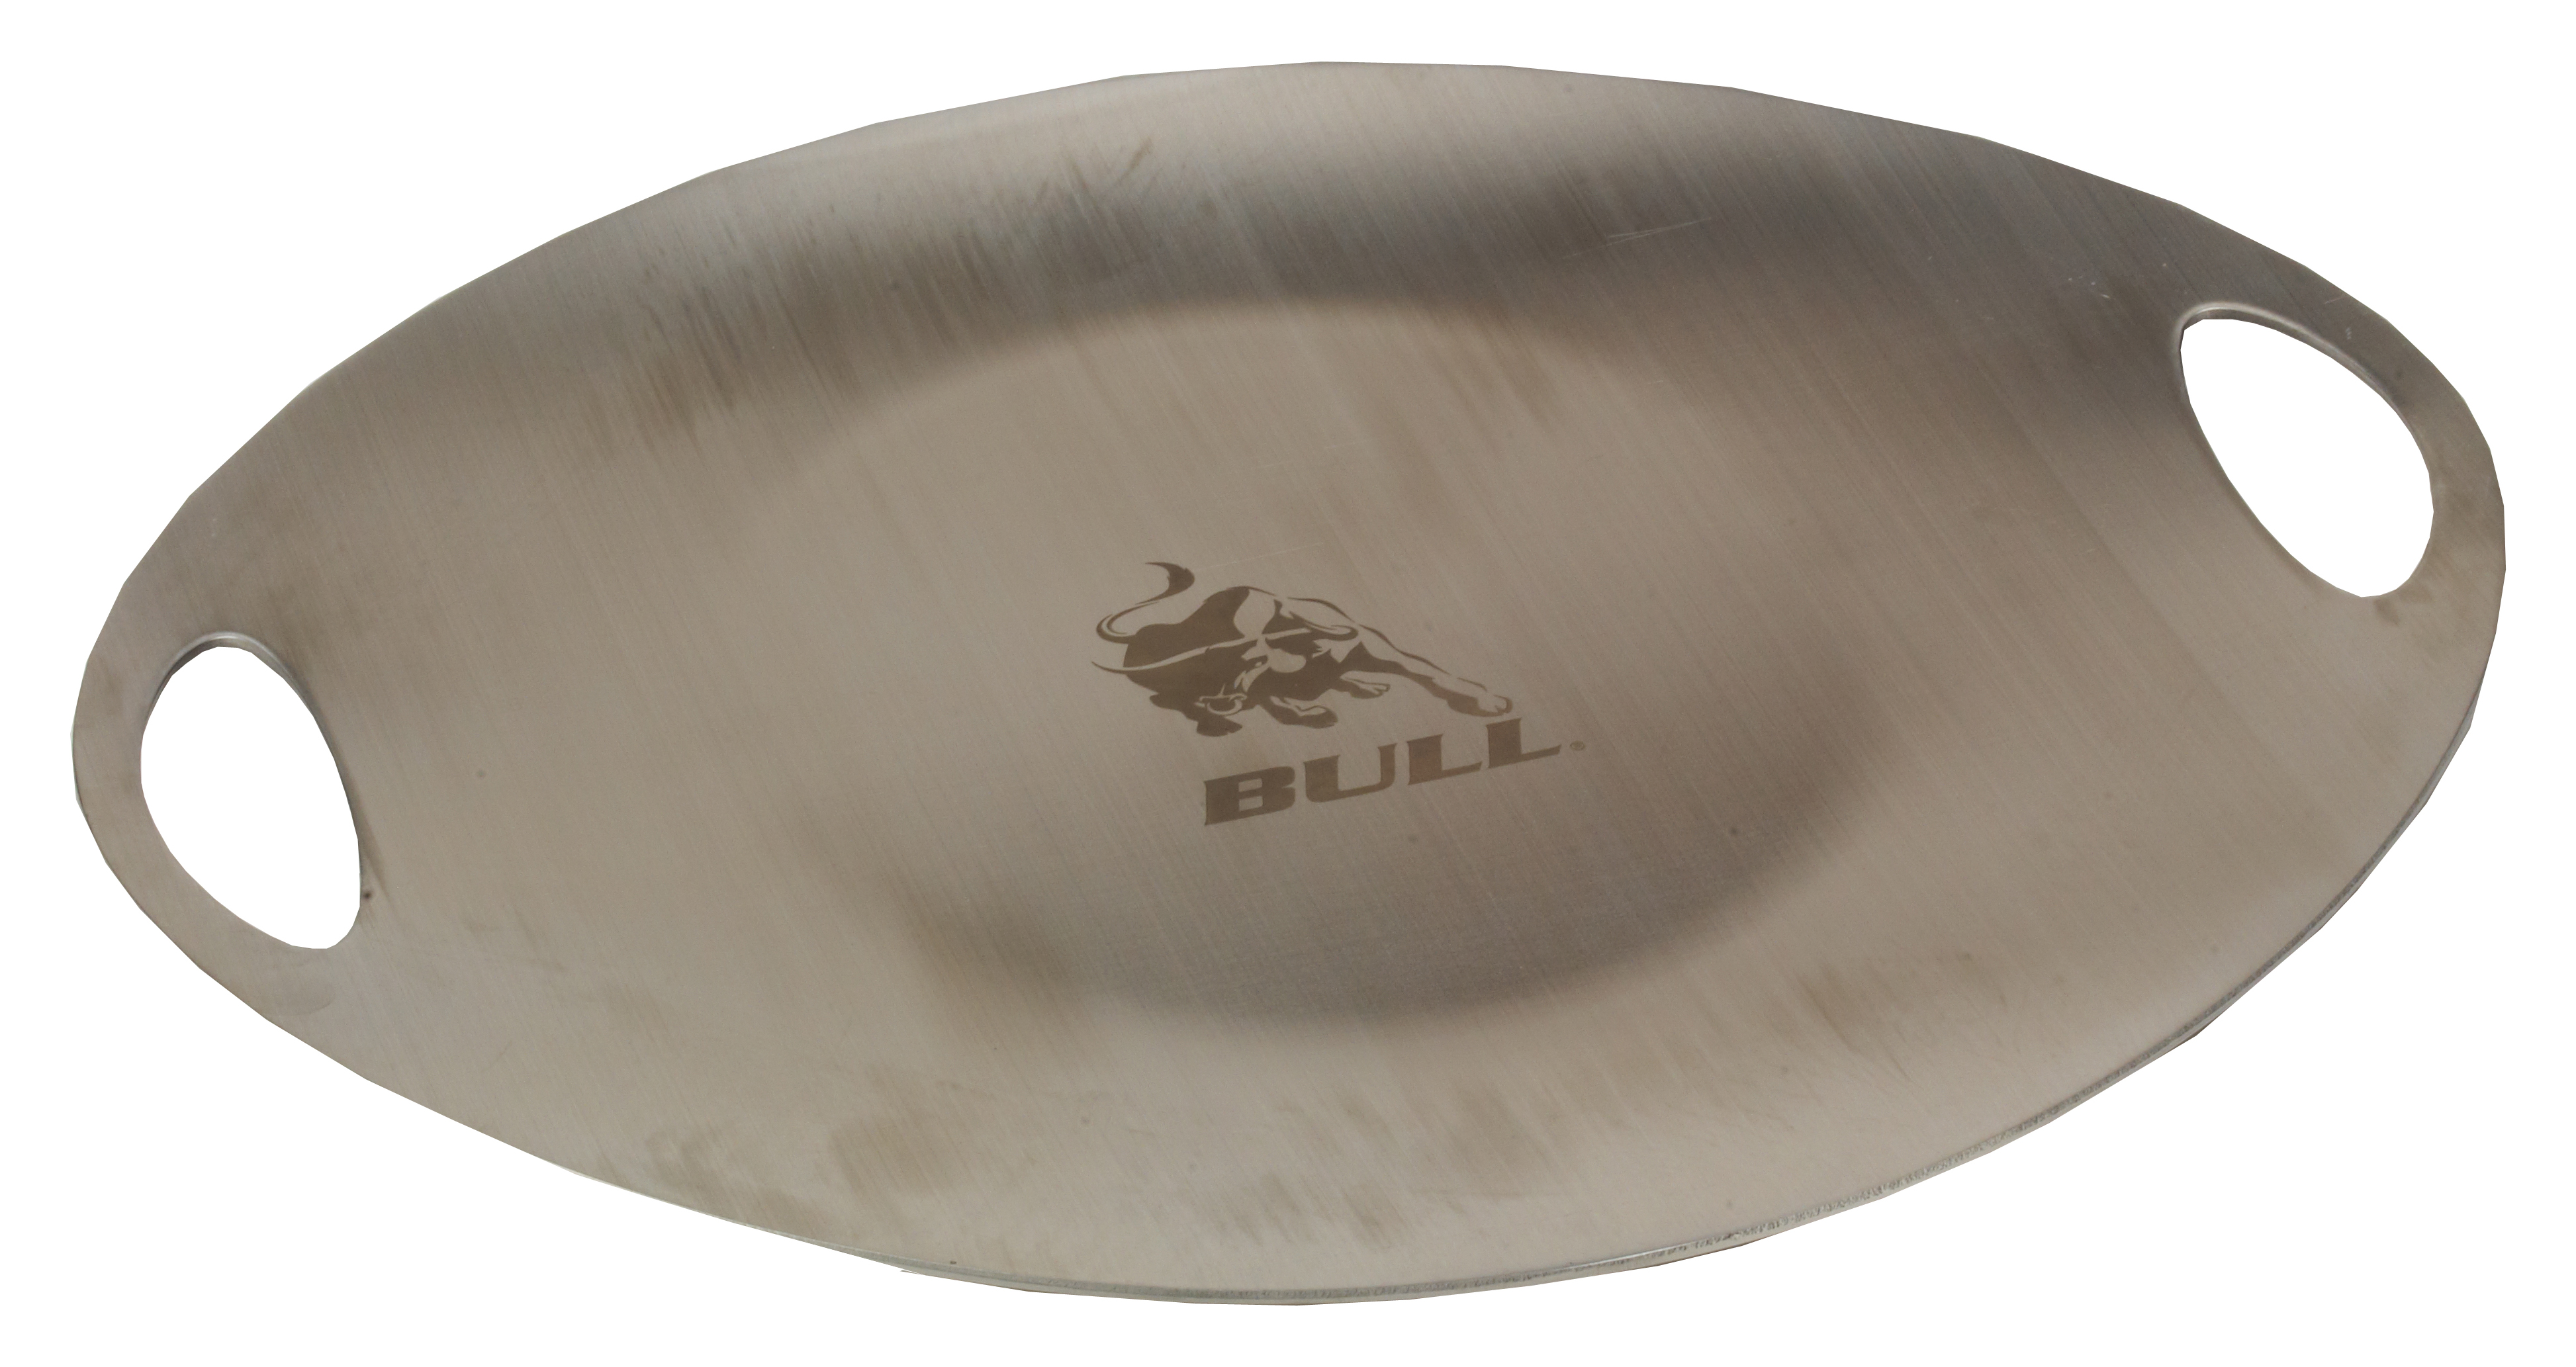 BULL Stainless Steel Grilling Serving Plate